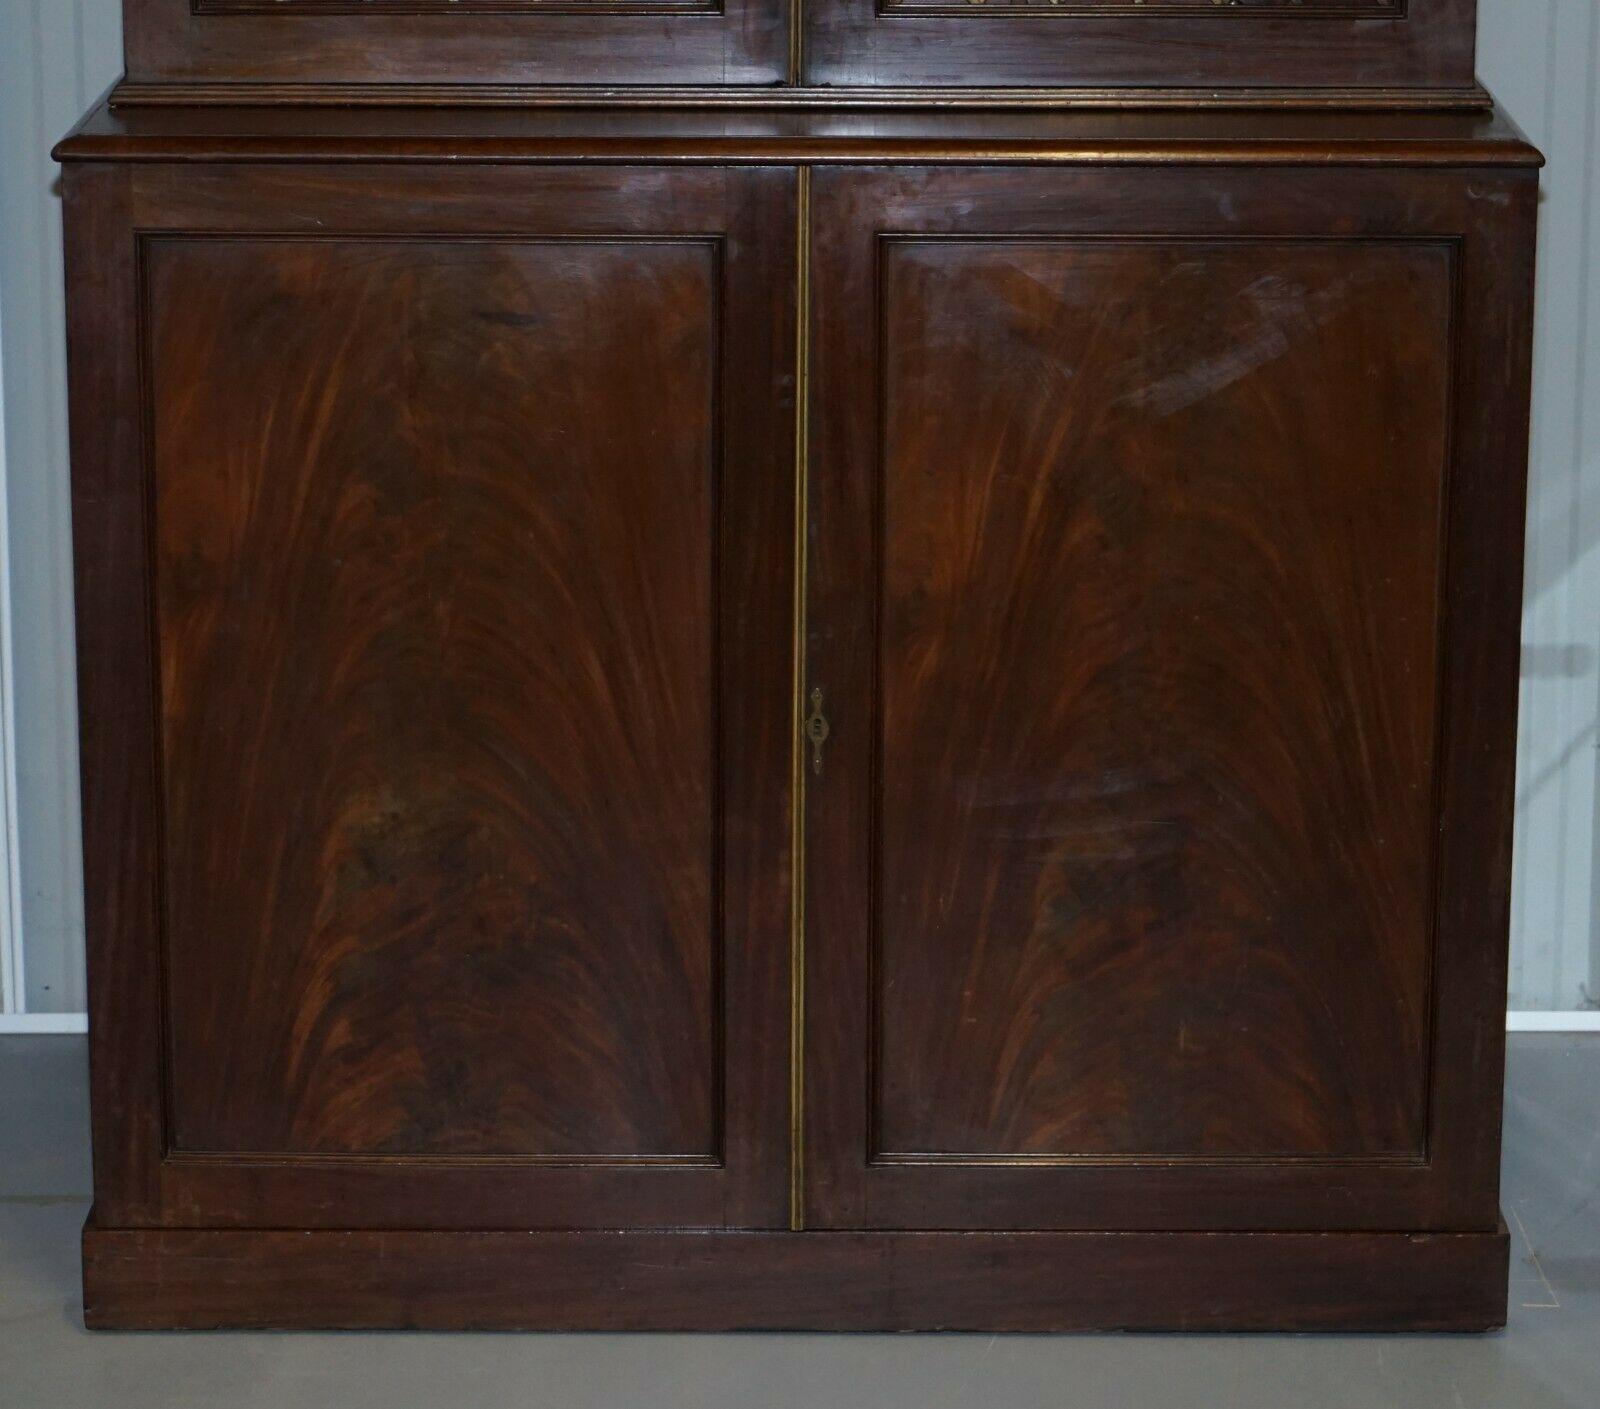 Hand-Crafted RARE 19TH CENTURY HARDWOOD PIERCED BRONZED DOOR BOOKCASE WiTH CHEST OF DRAWERS For Sale